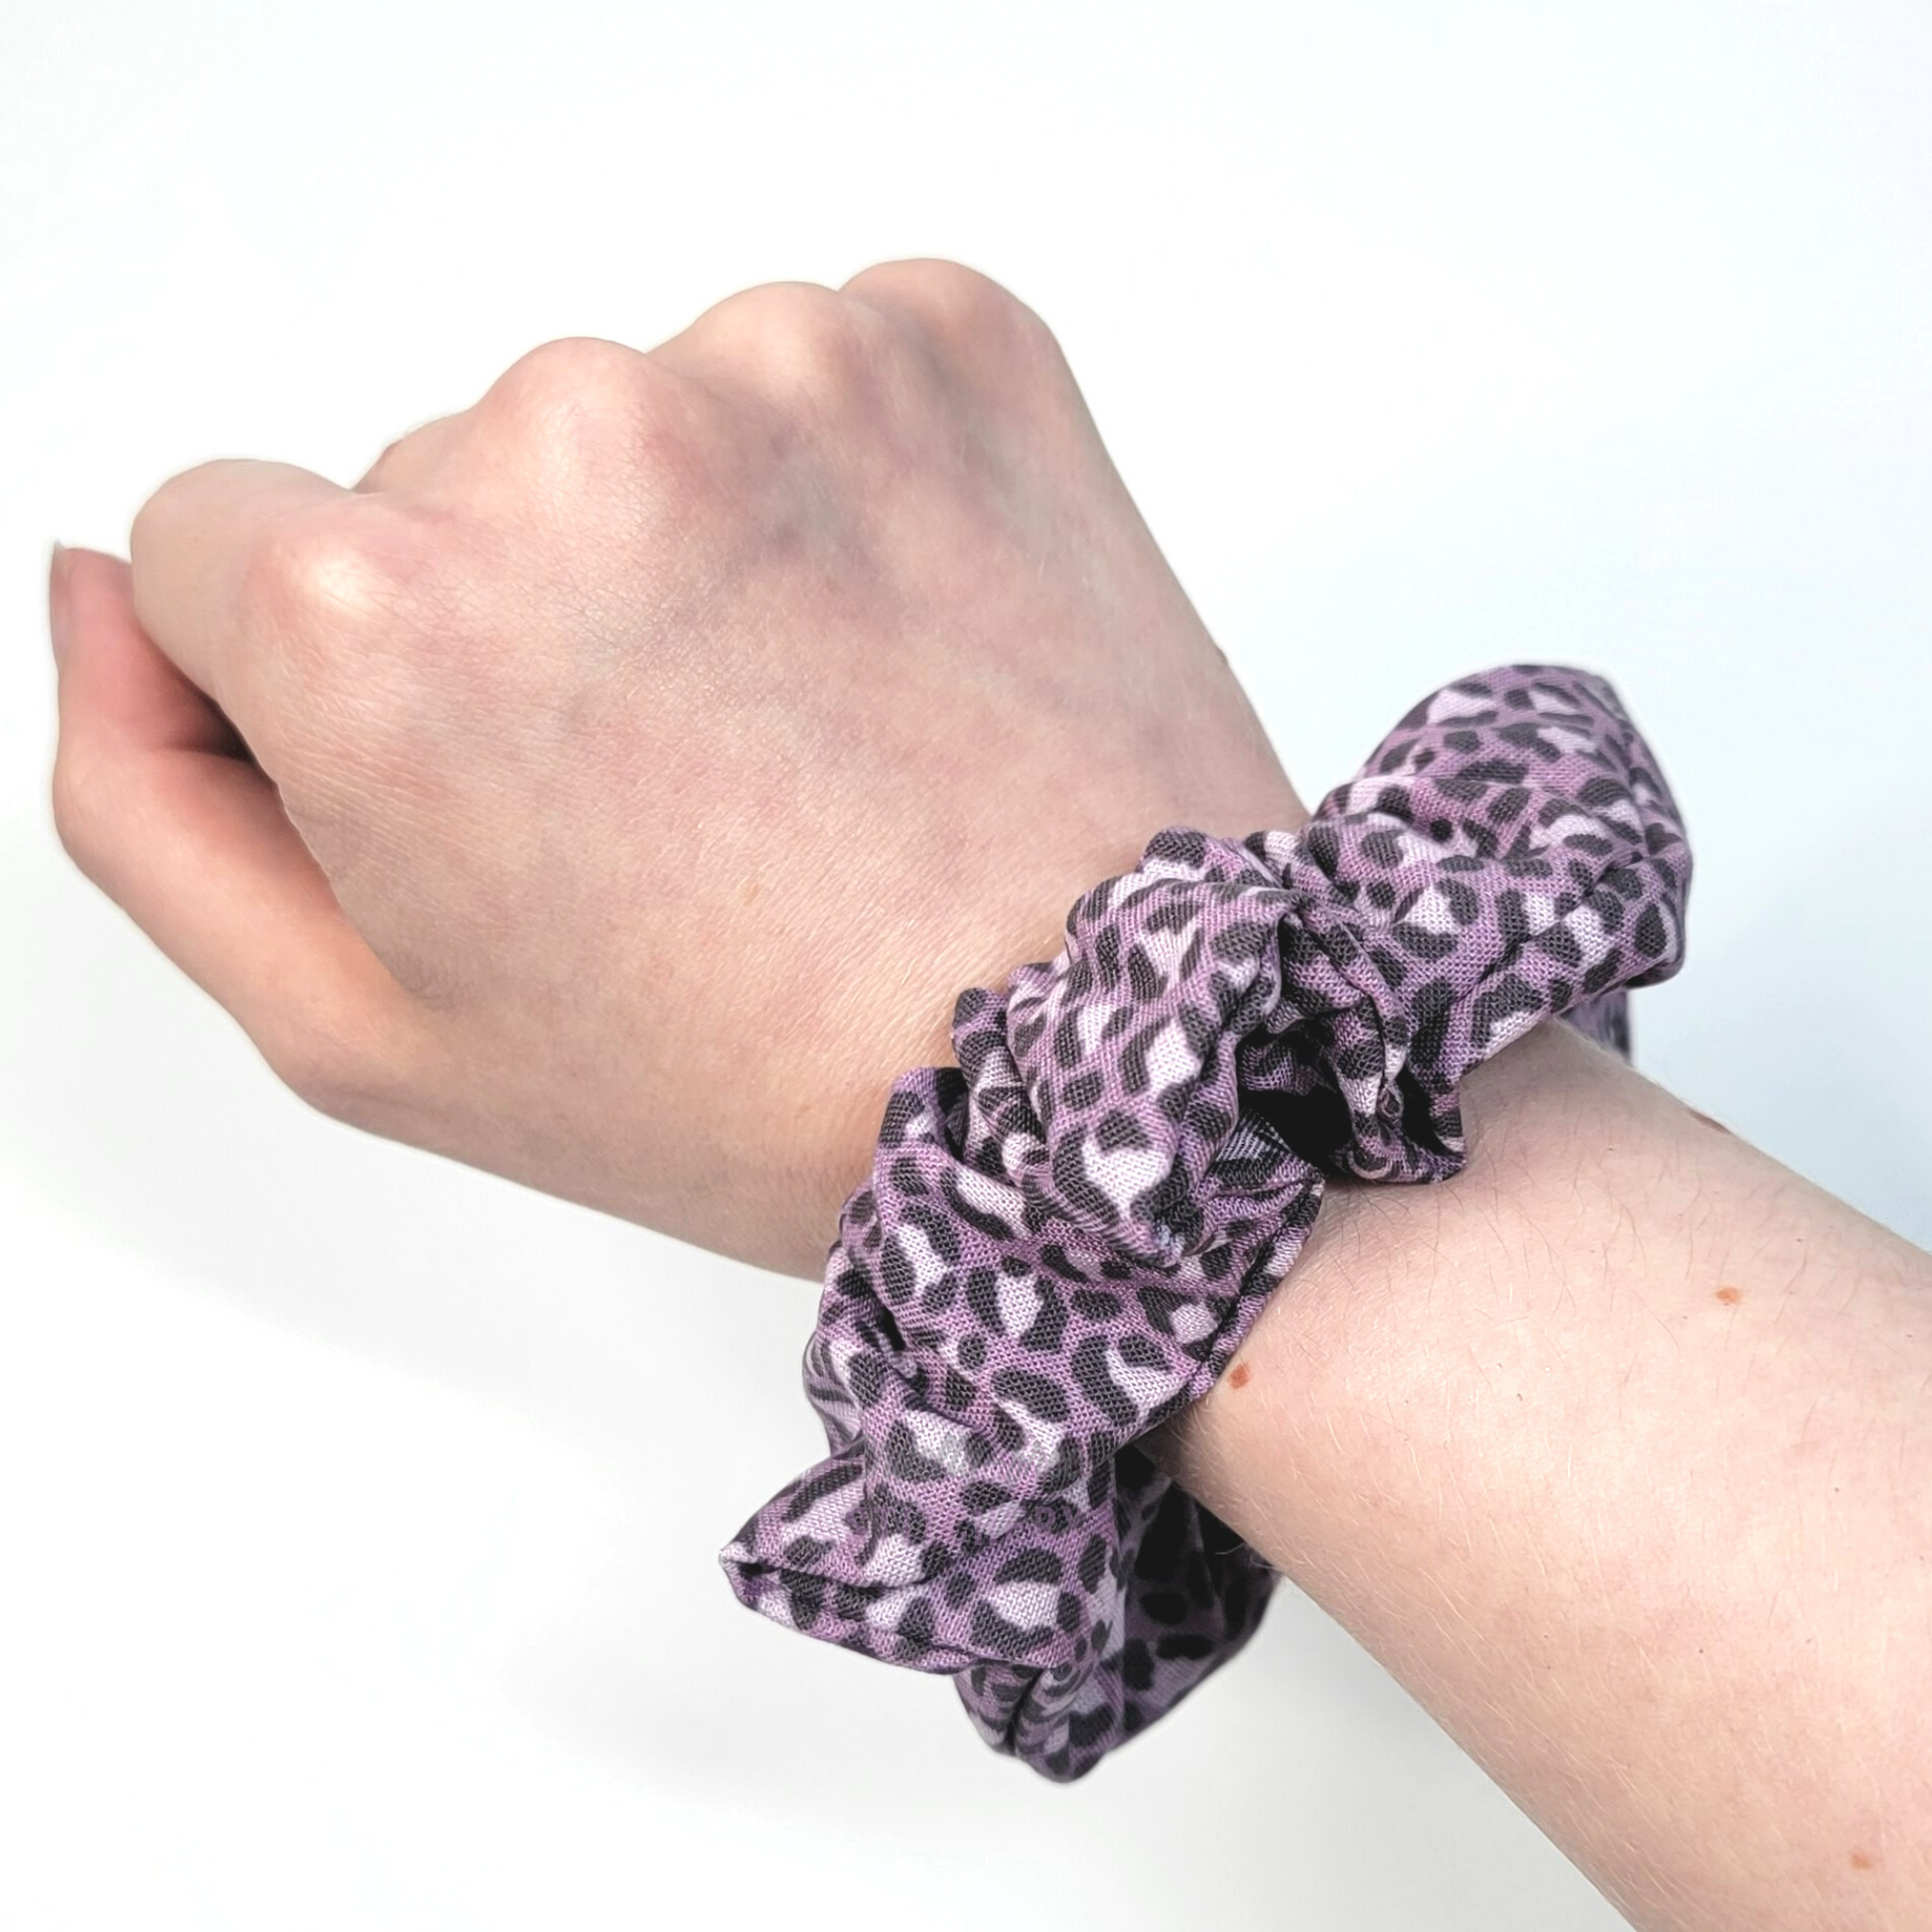 Muted violet purple leopard print Scrunchie shown on my wrist for size reference. Fabric sticks out about an inch from the center of the scrunchie.